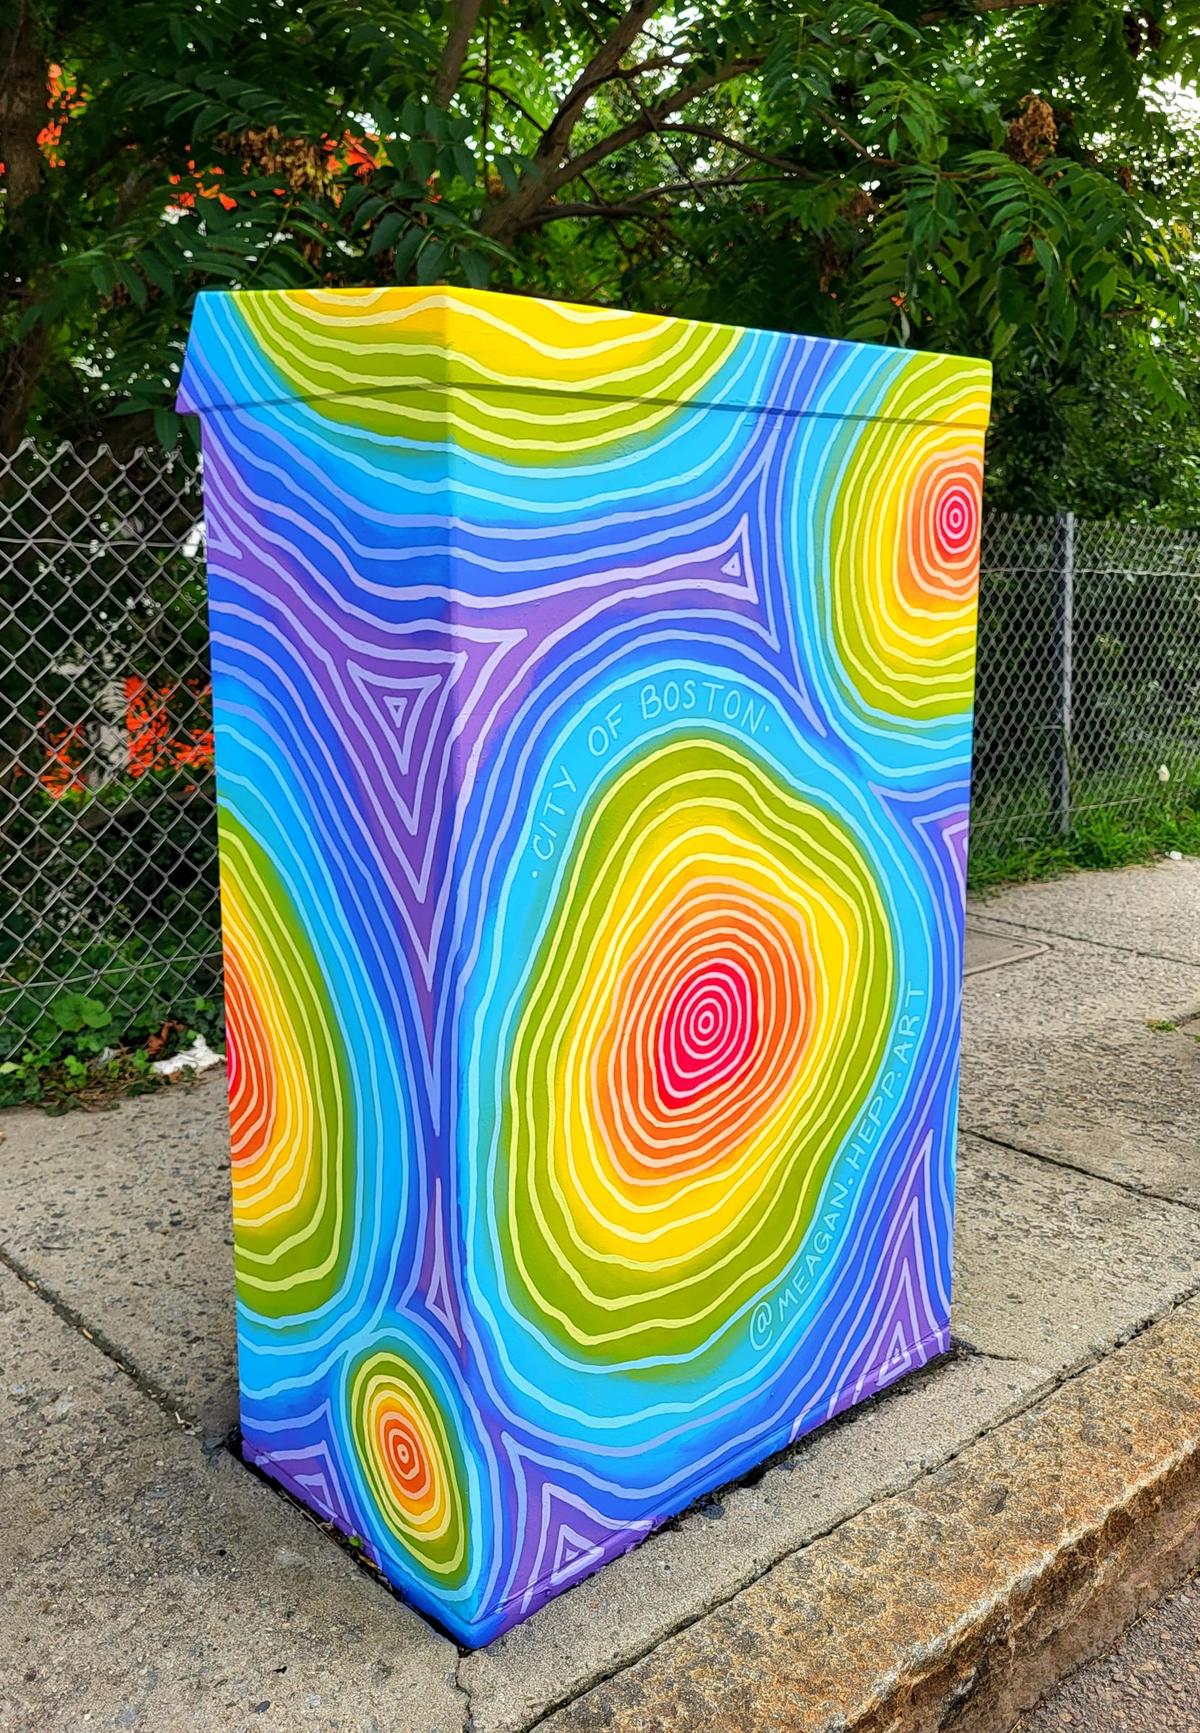 Painted utility box with concentric, rounded shapes in rainbow colors